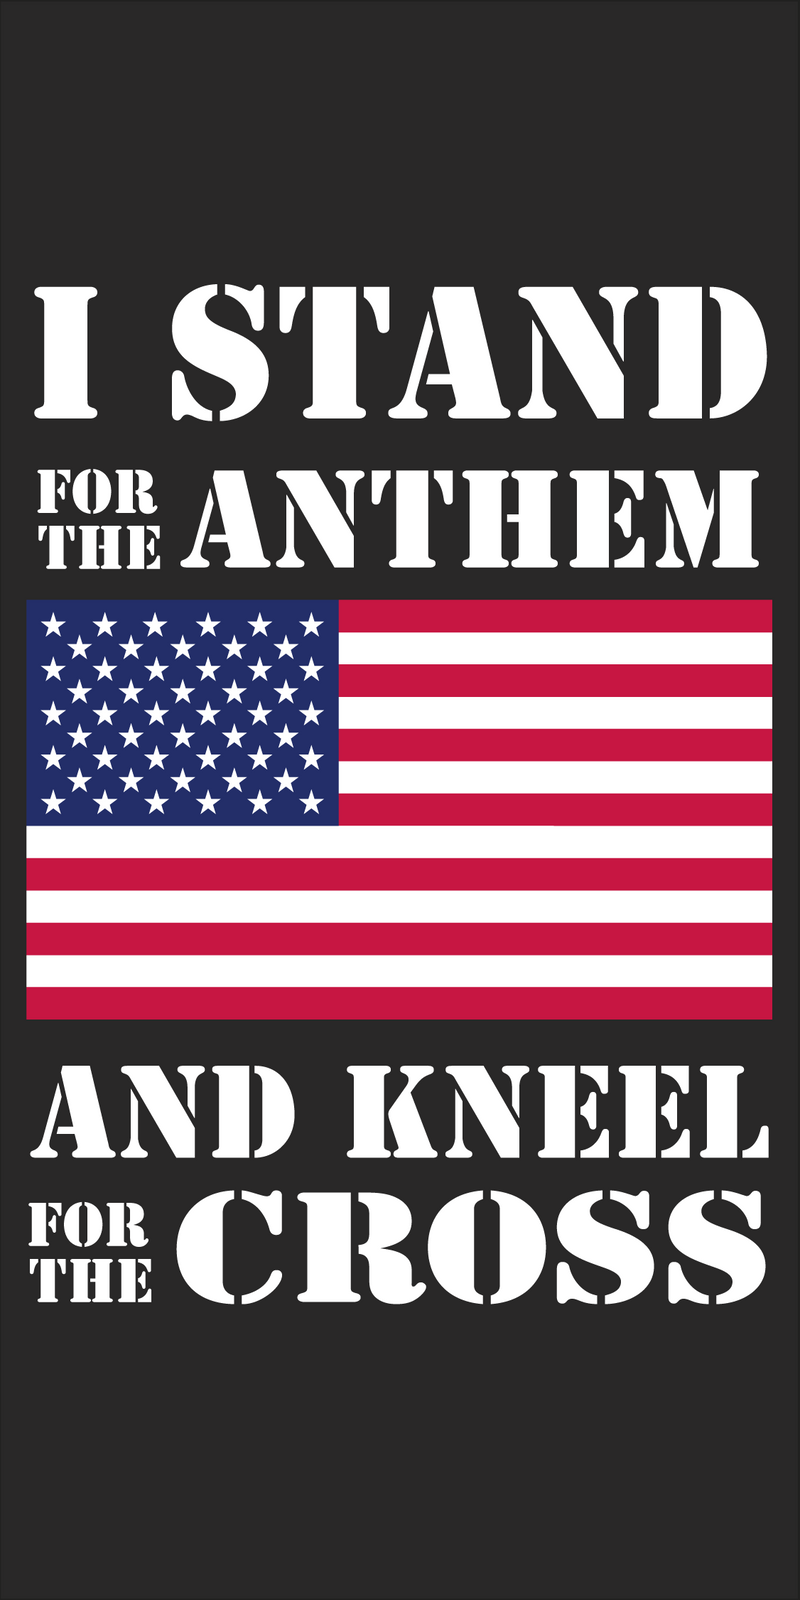 I Stand For The Anthem And Kneel For The Cross - Bumper Sticker